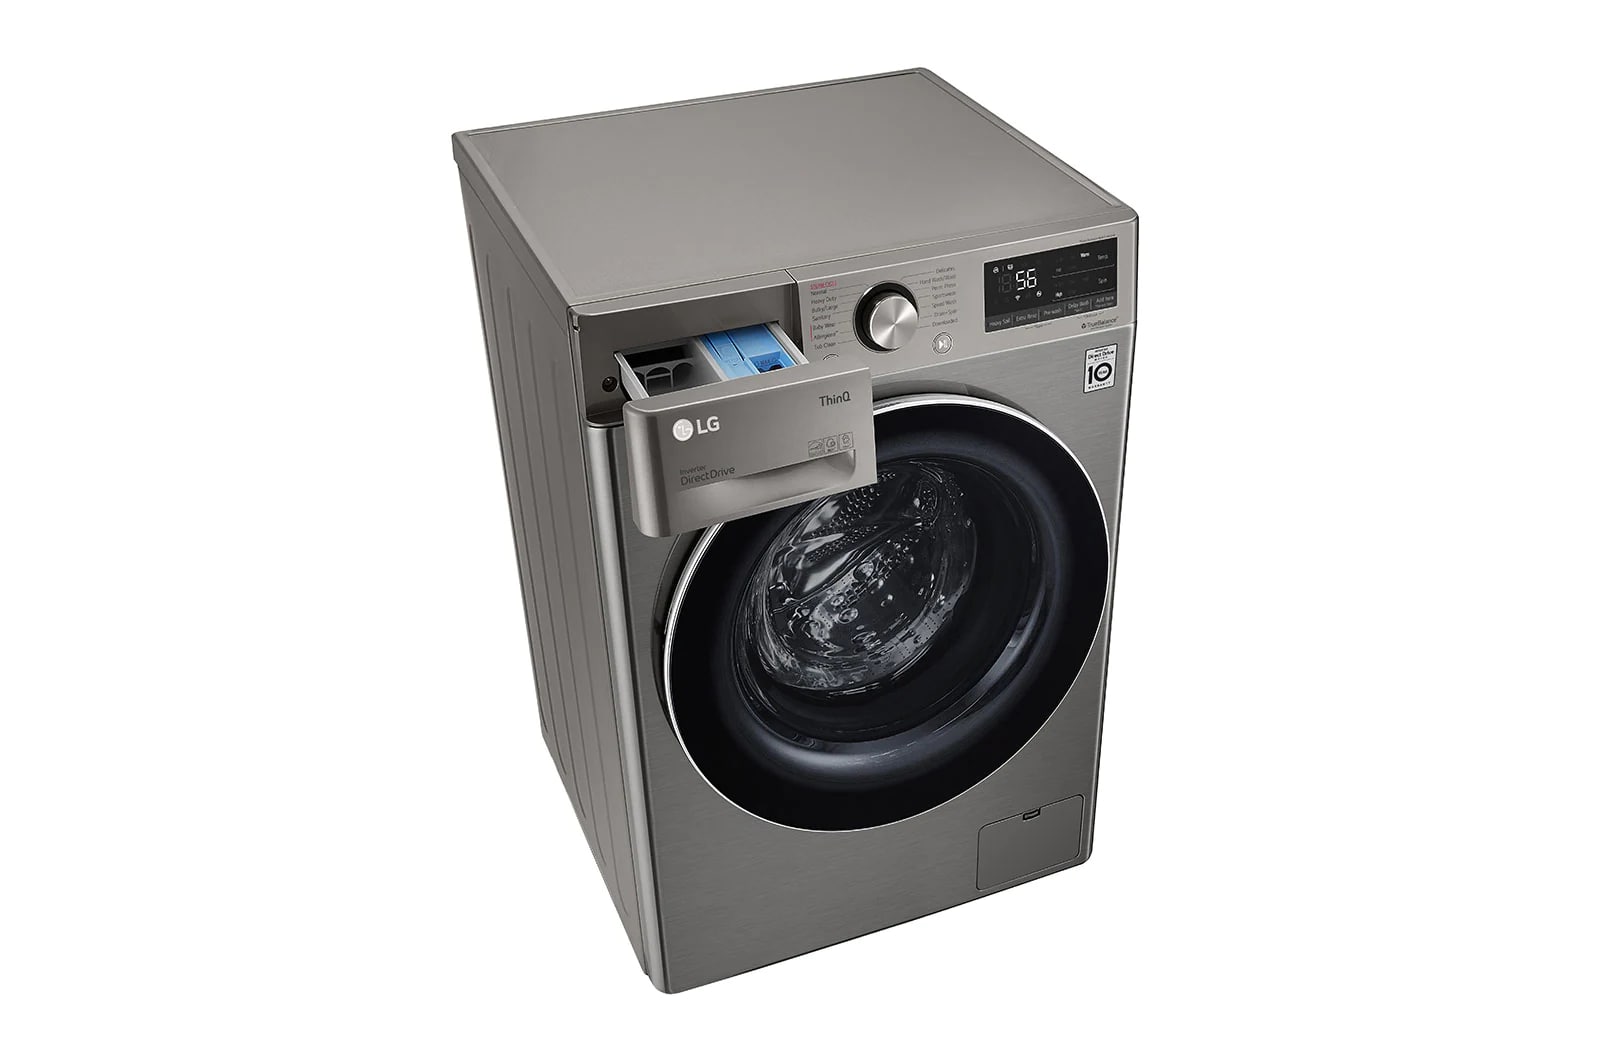 LG - 2.6 cu. Ft  Front Load Washer in Platinum - WM1455HPA